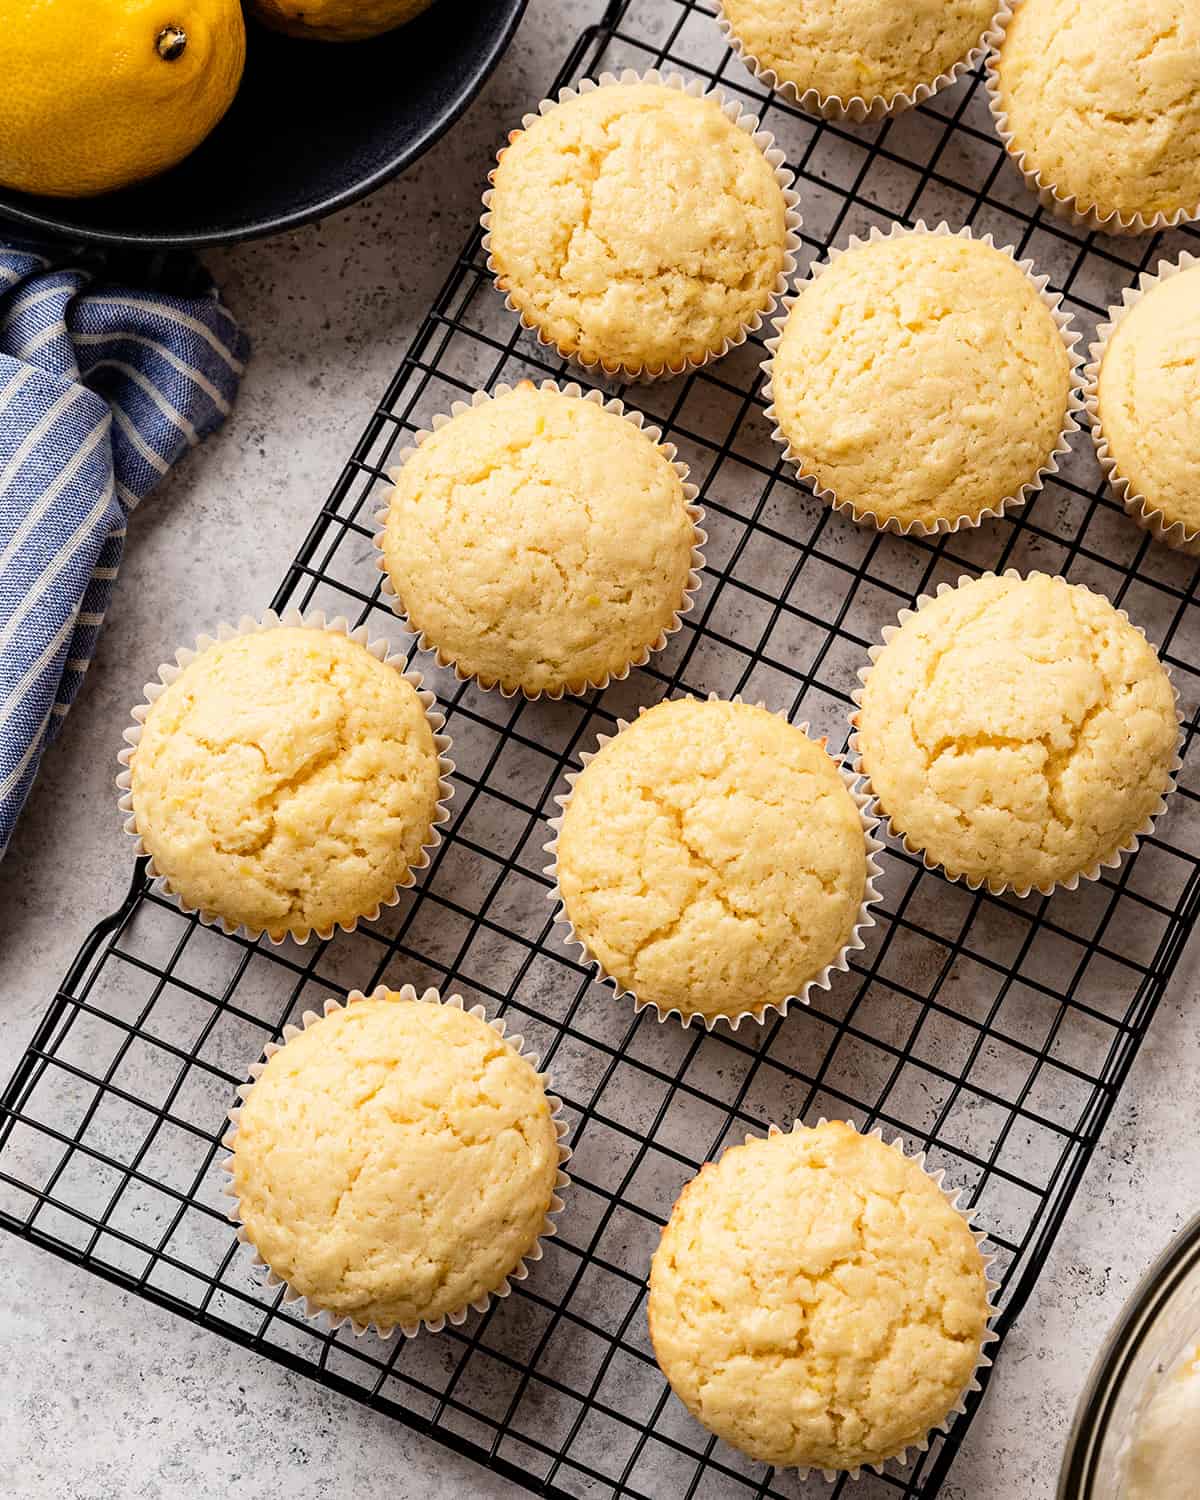 10 lemon cupcakes on a wire cooling rack